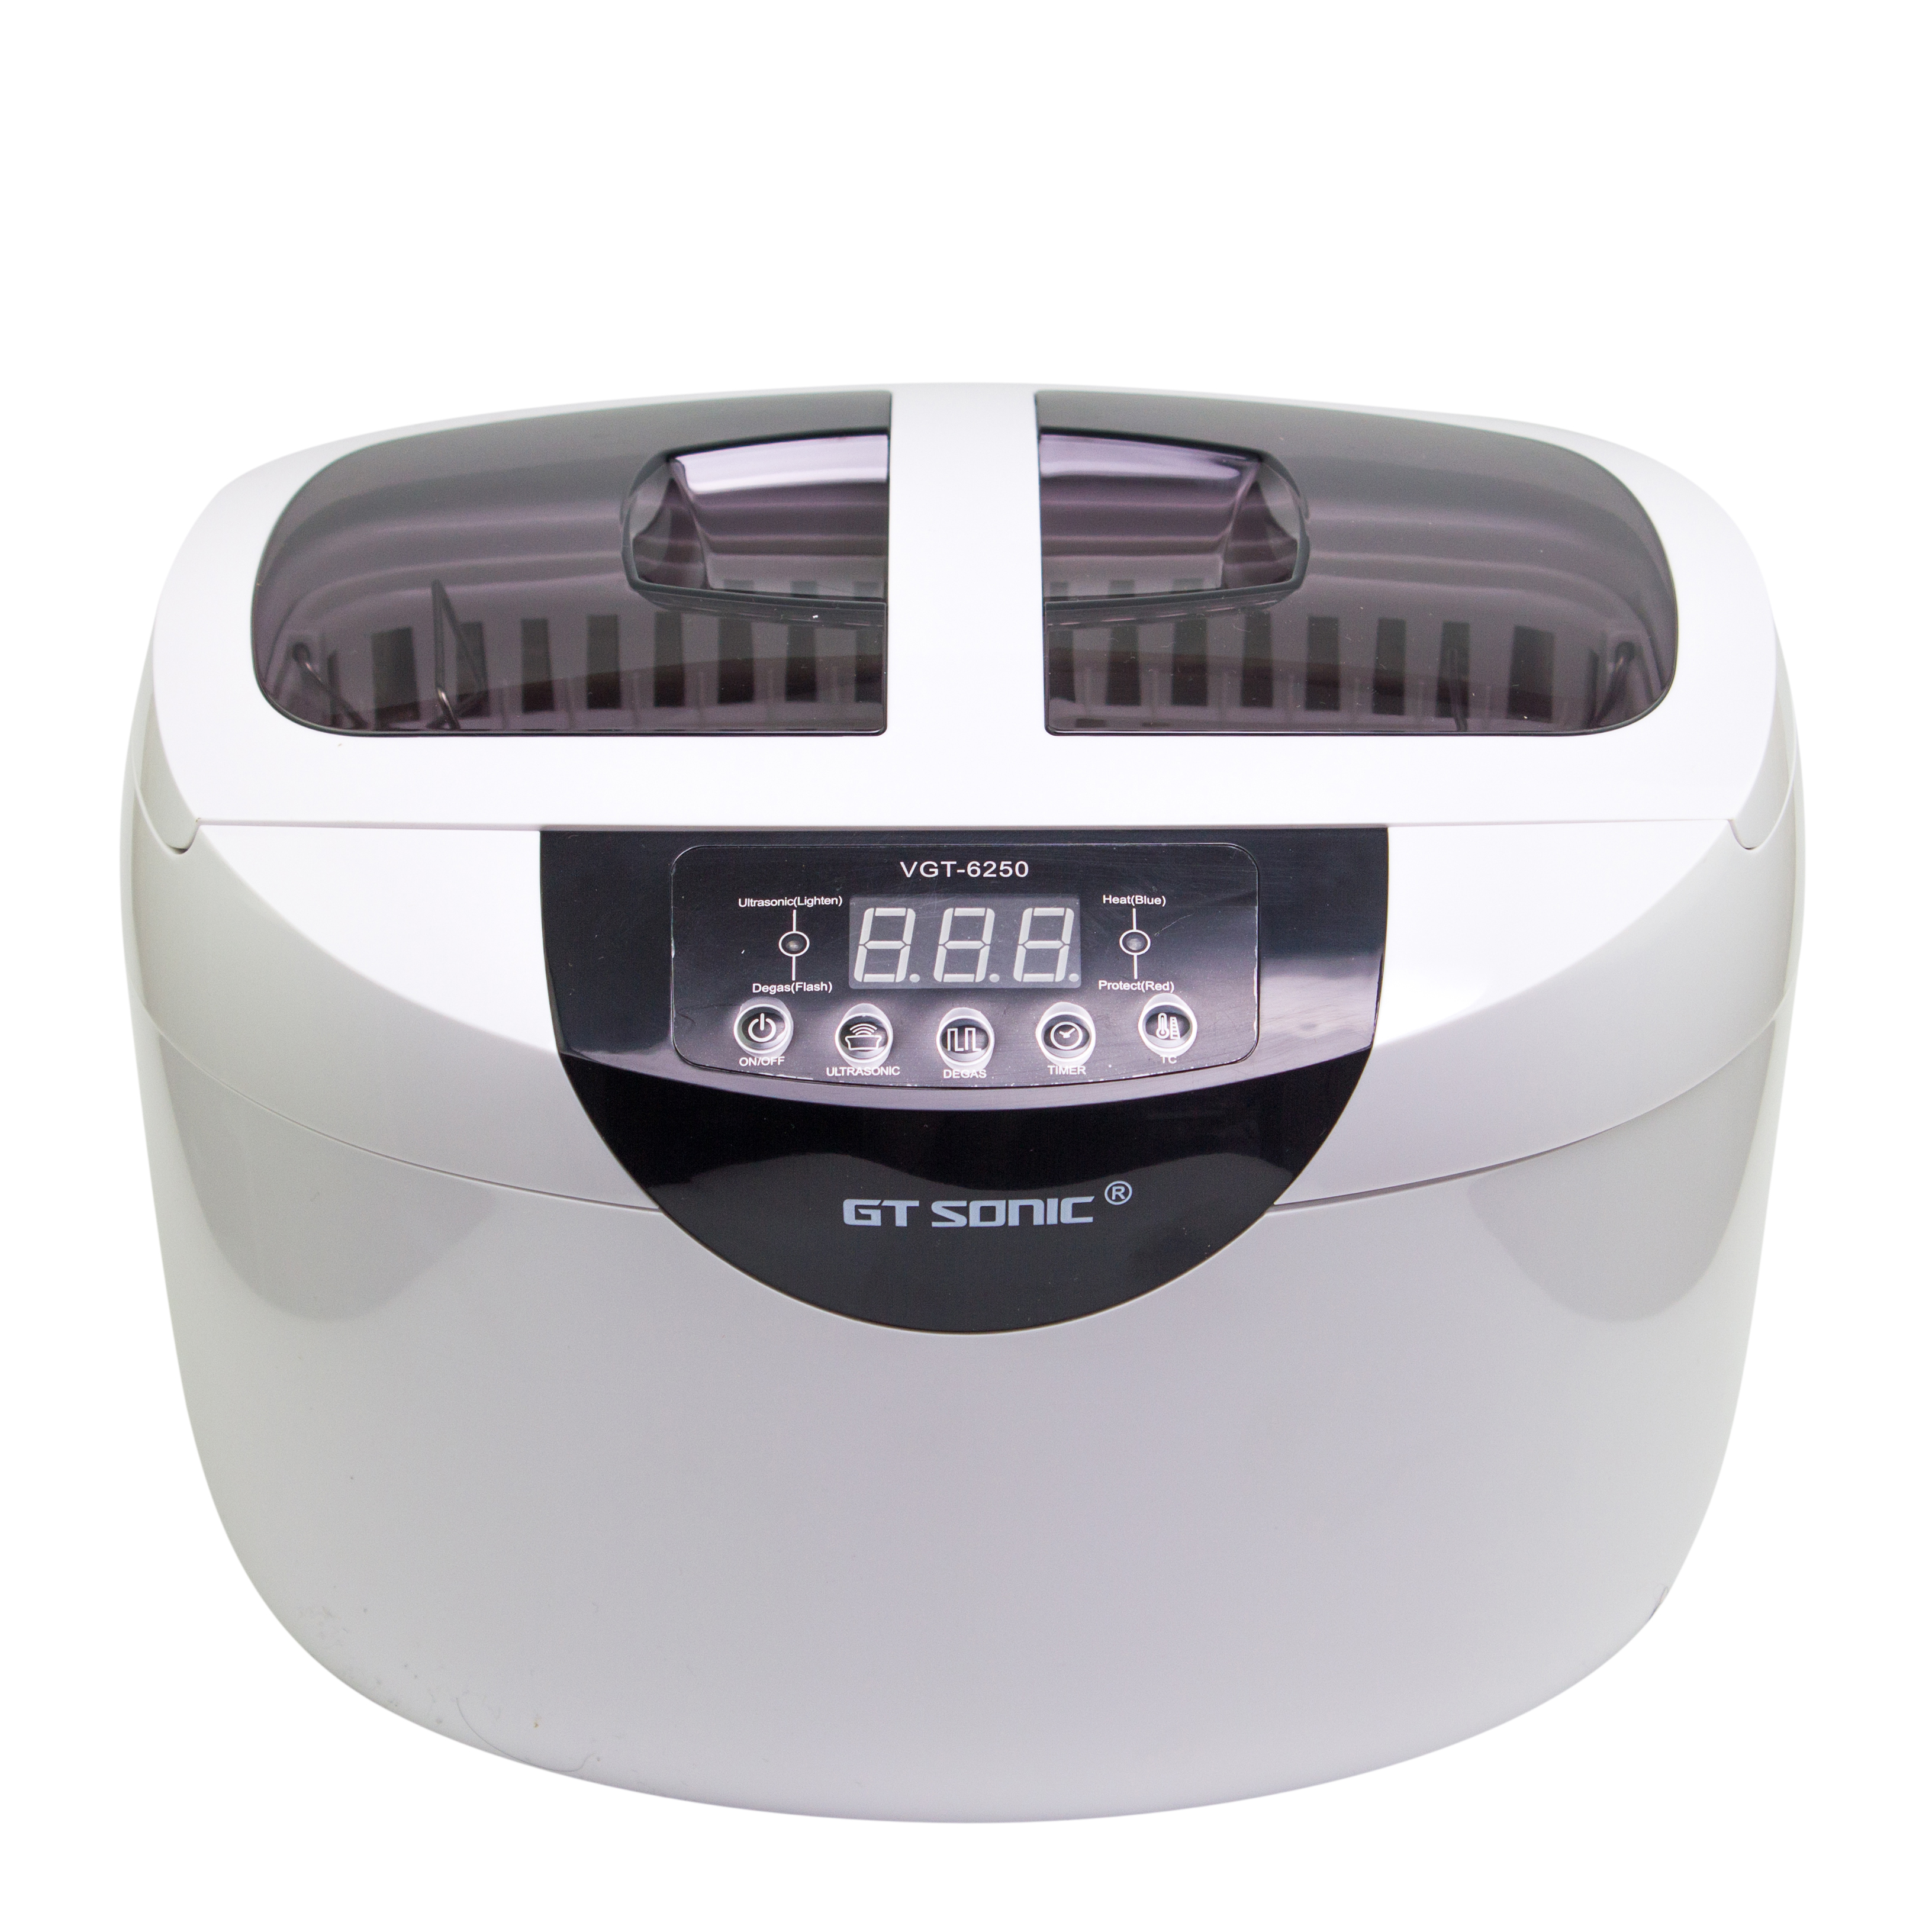 Faceshowes Ultrasonic vgt- 6250 digital ultrasonic cleaner for Jewelry and watch